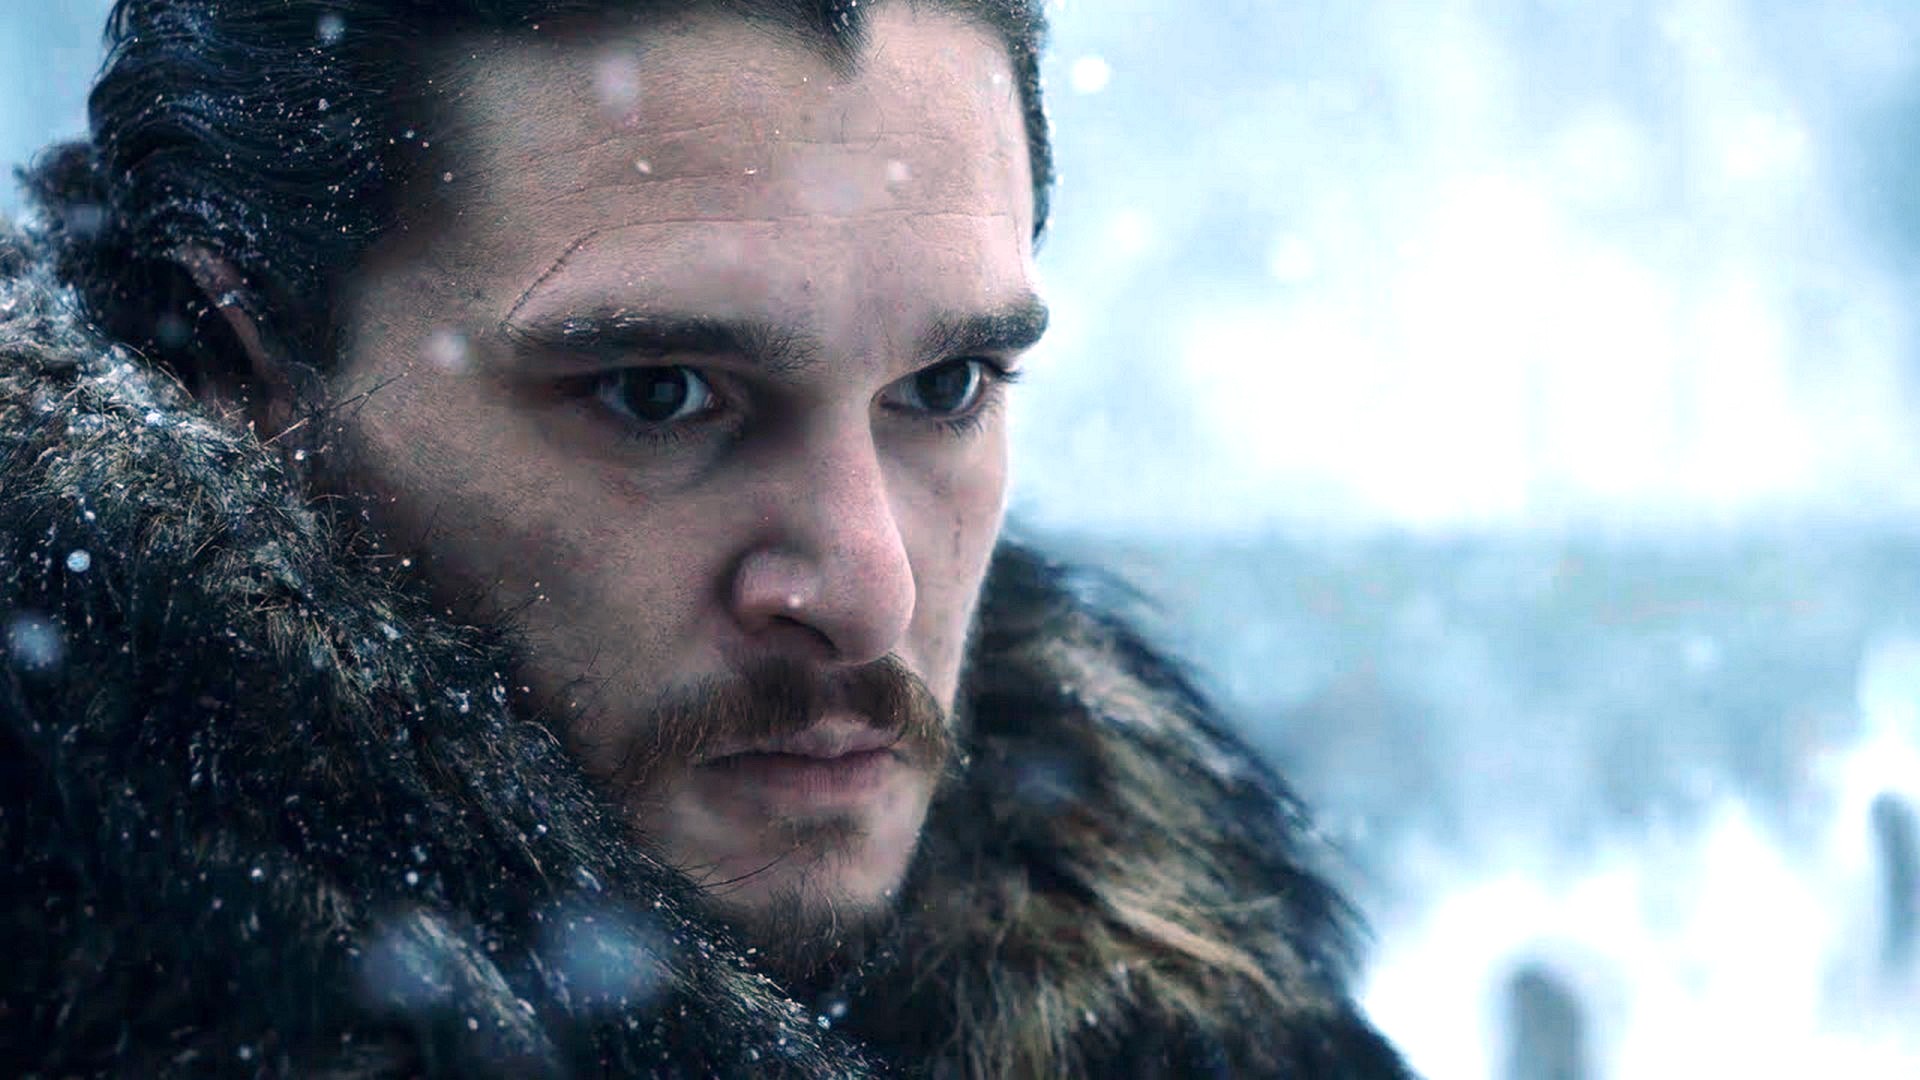 Game of Thrones Jon Snow Wallpaper HD with high-resolution 1920x1080 pixel. You can use this poster wallpaper for your Desktop Computers, Mac Screensavers, Windows Backgrounds, iPhone Wallpapers, Tablet or Android Lock screen and another Mobile device